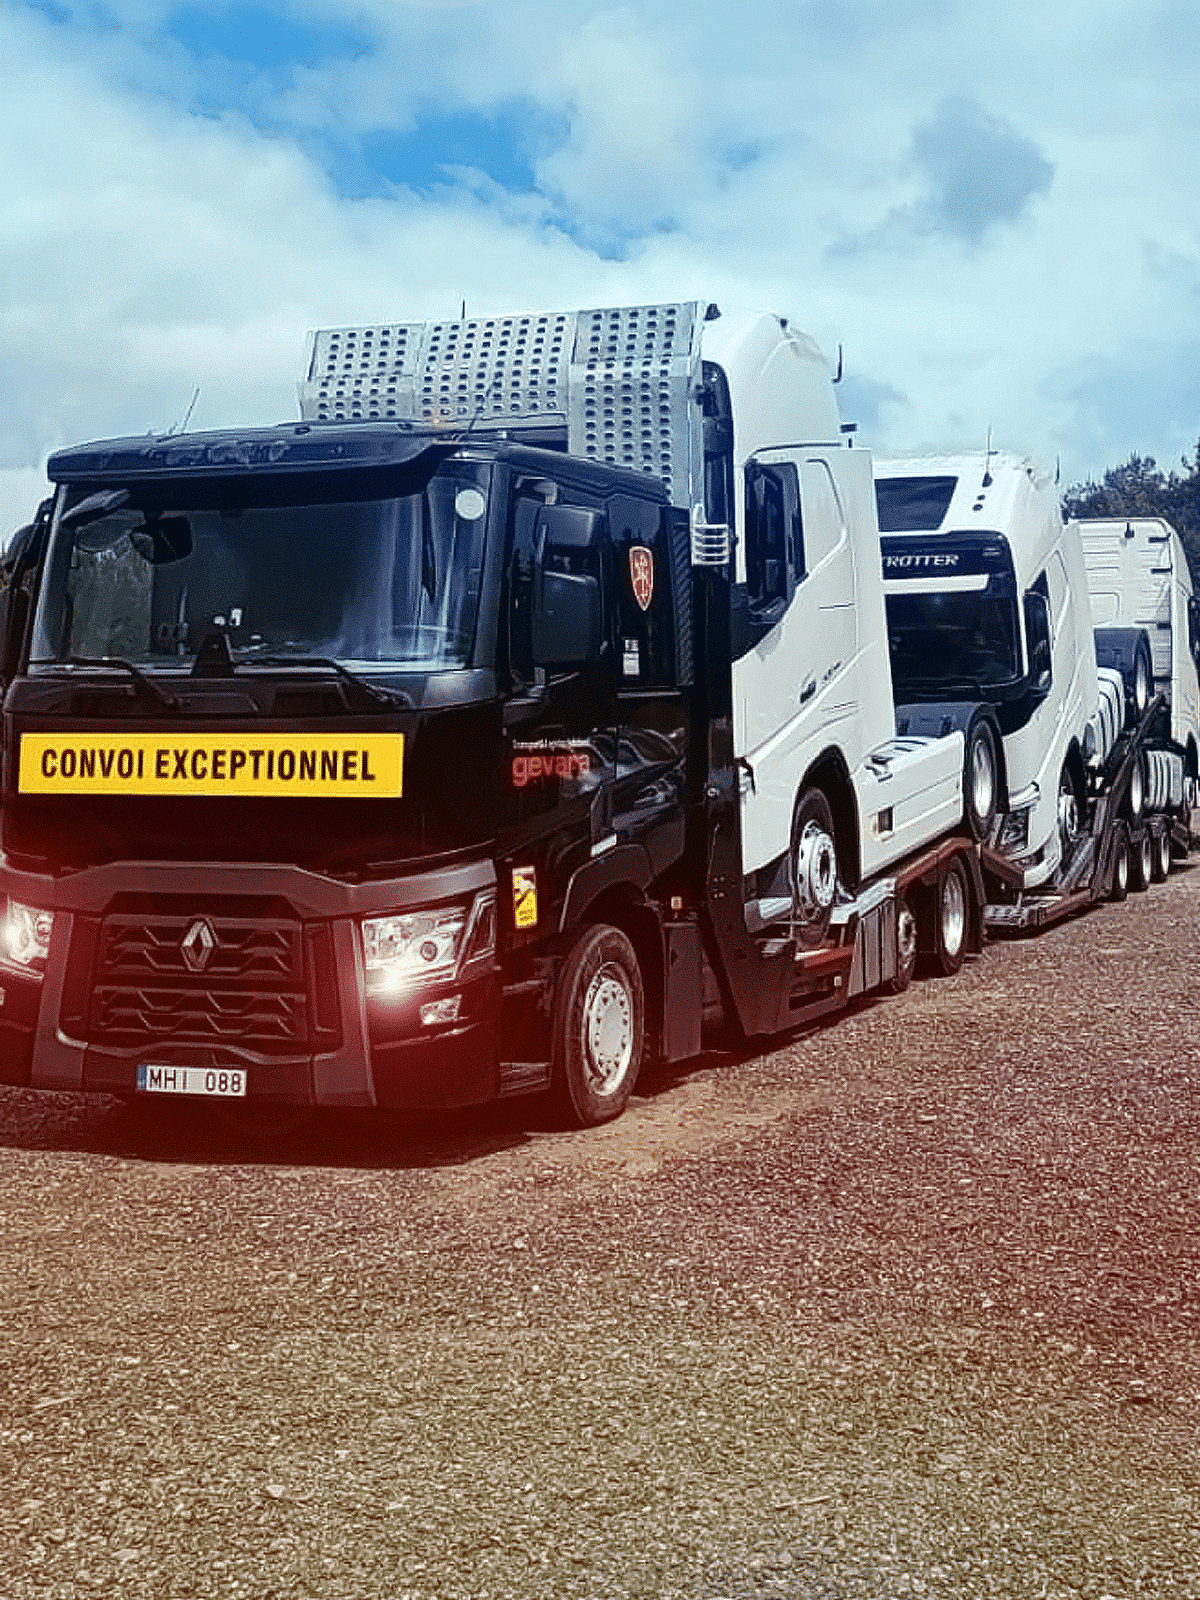 AUTOTRANSPORTER SERVICE IN ALL EUROPE